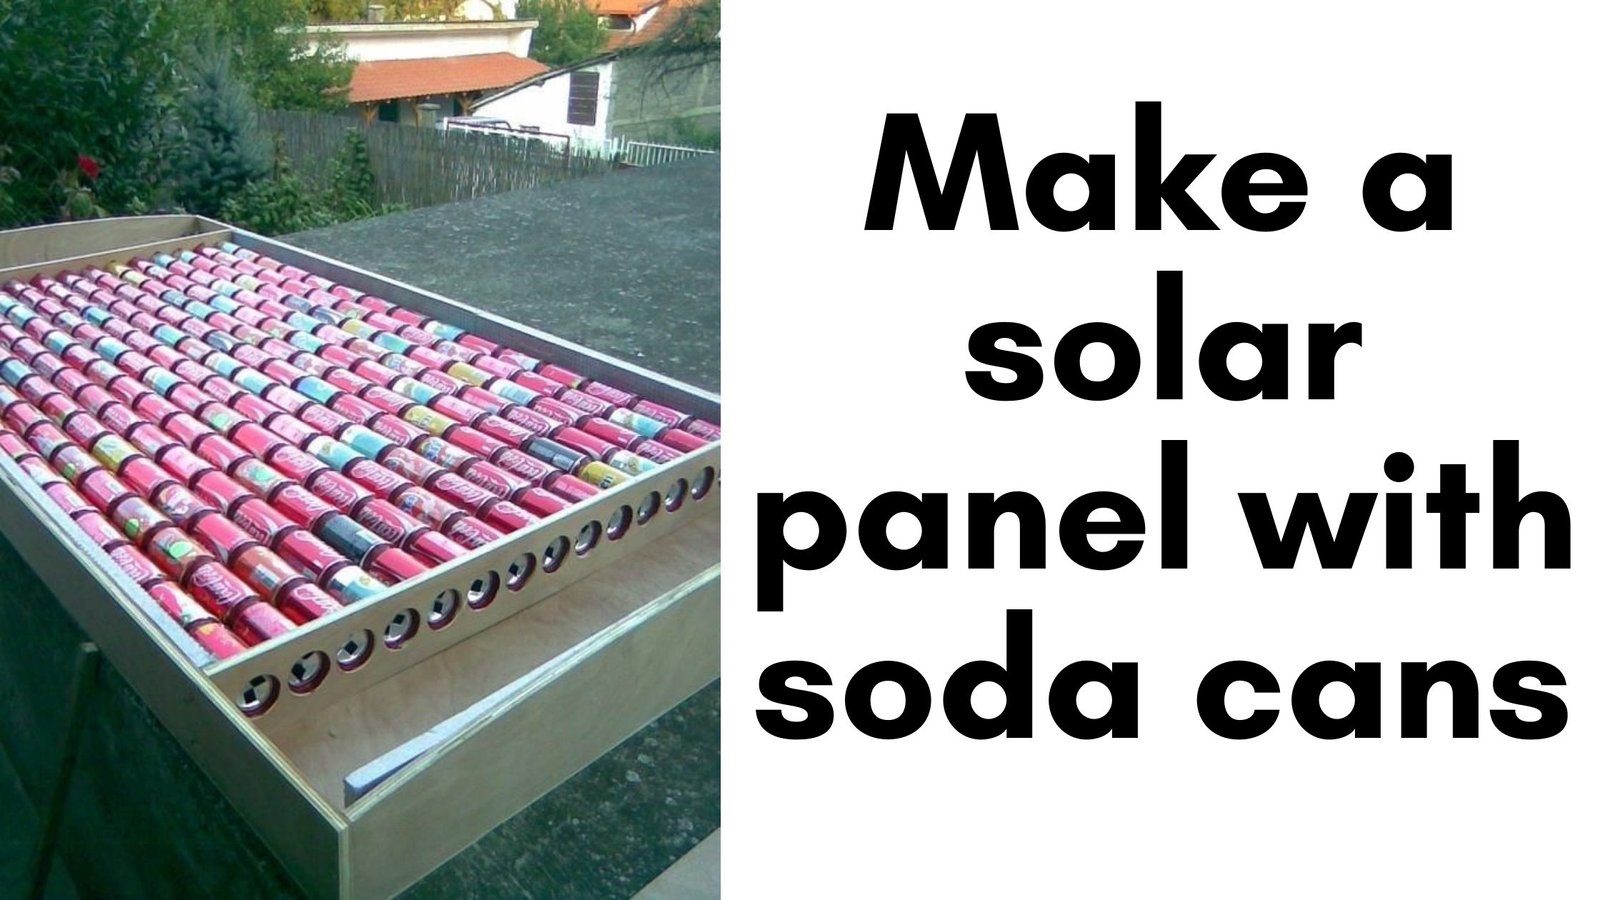 solar panel made with soda cans